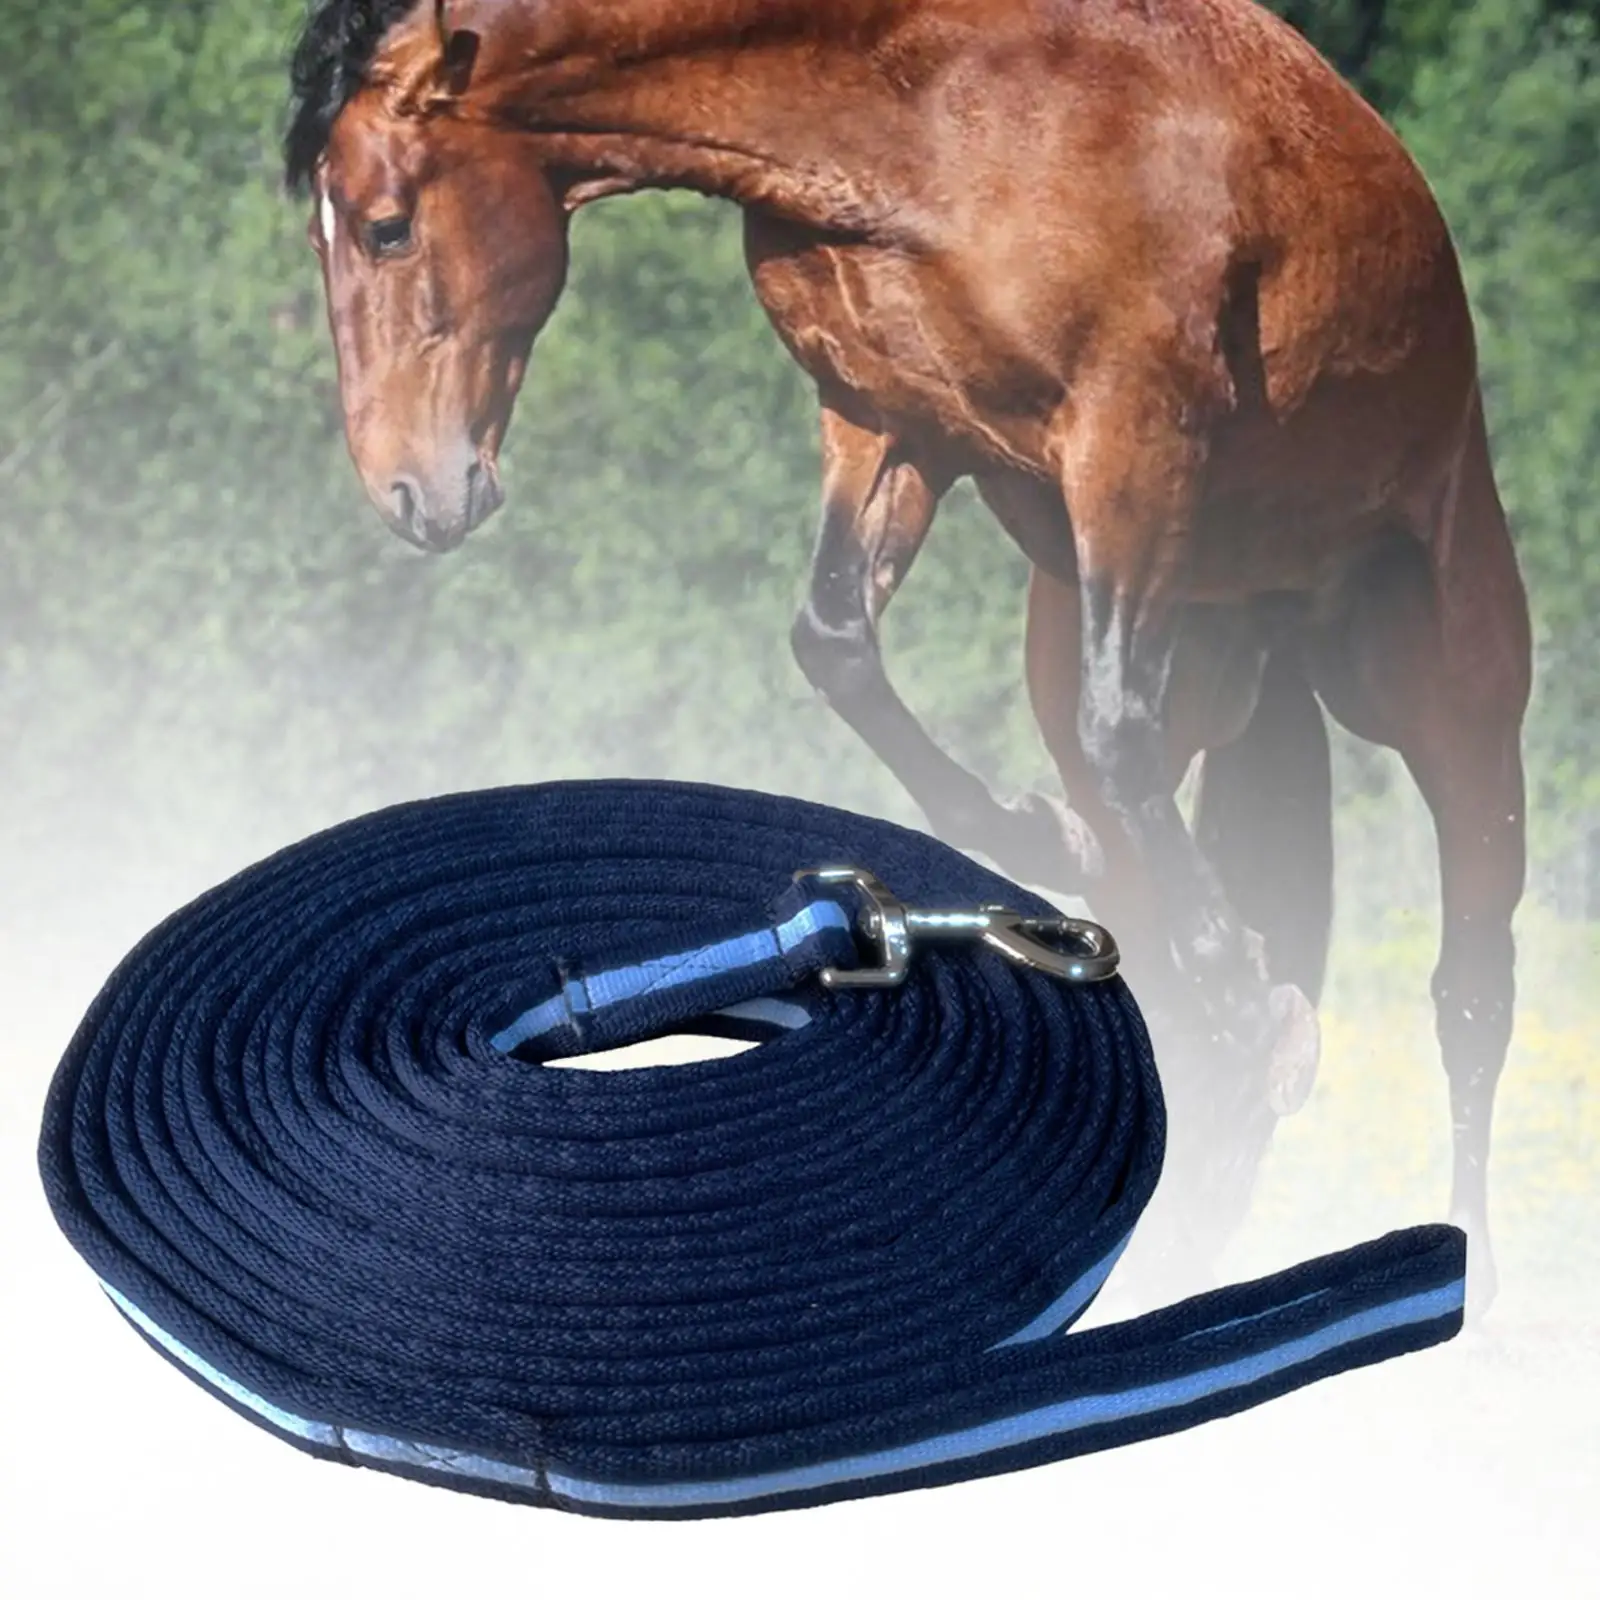 Horse Dog Training Leash 8 Meters Webbing Long Line Lunge Leads Durable Horse Rope Lead for Dog Horse Play Backyard